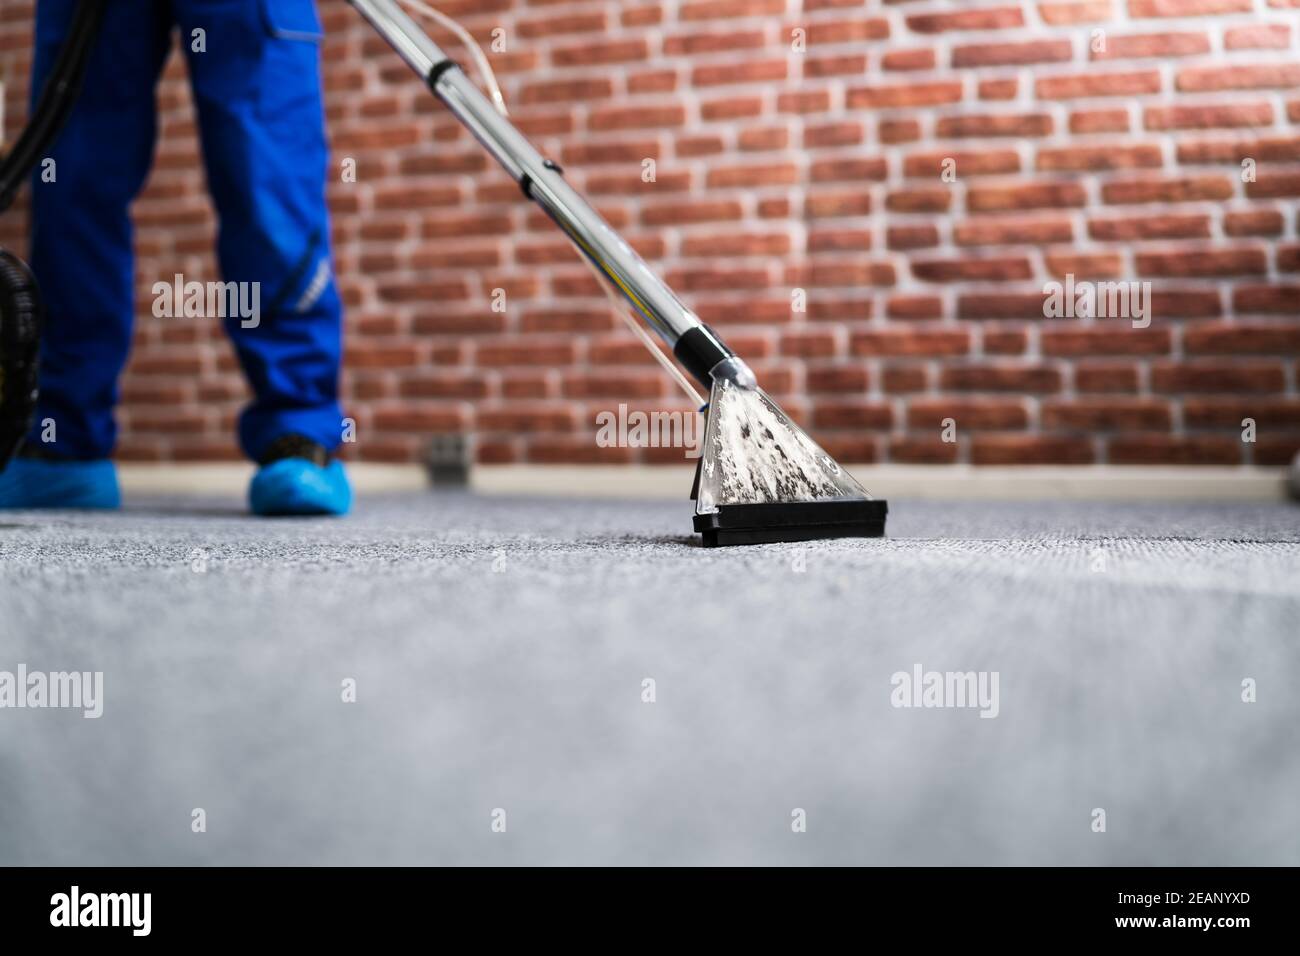 Janitor Cleaning Carpet With Vacuum Cleaner Stock Photo